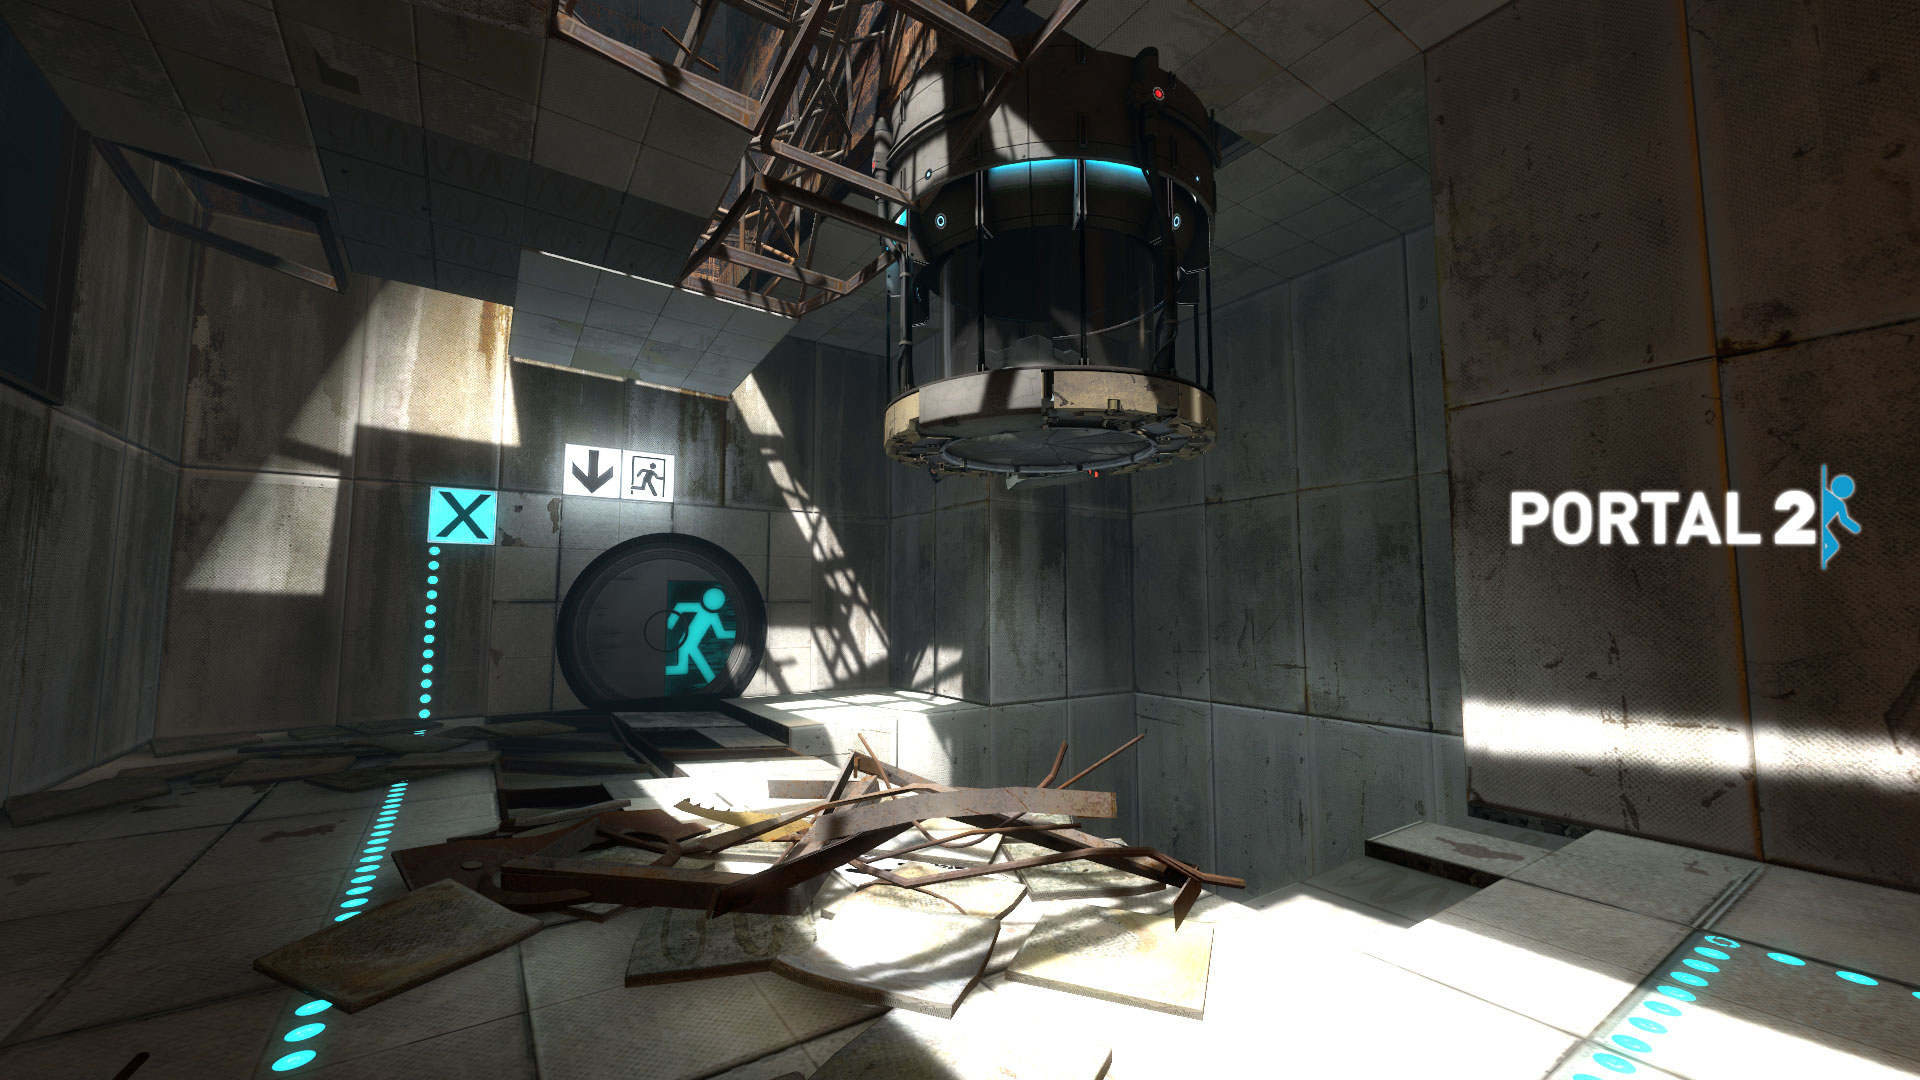 Portal 2 Wallpapers in HD High Resolution Page 5 1920x1080